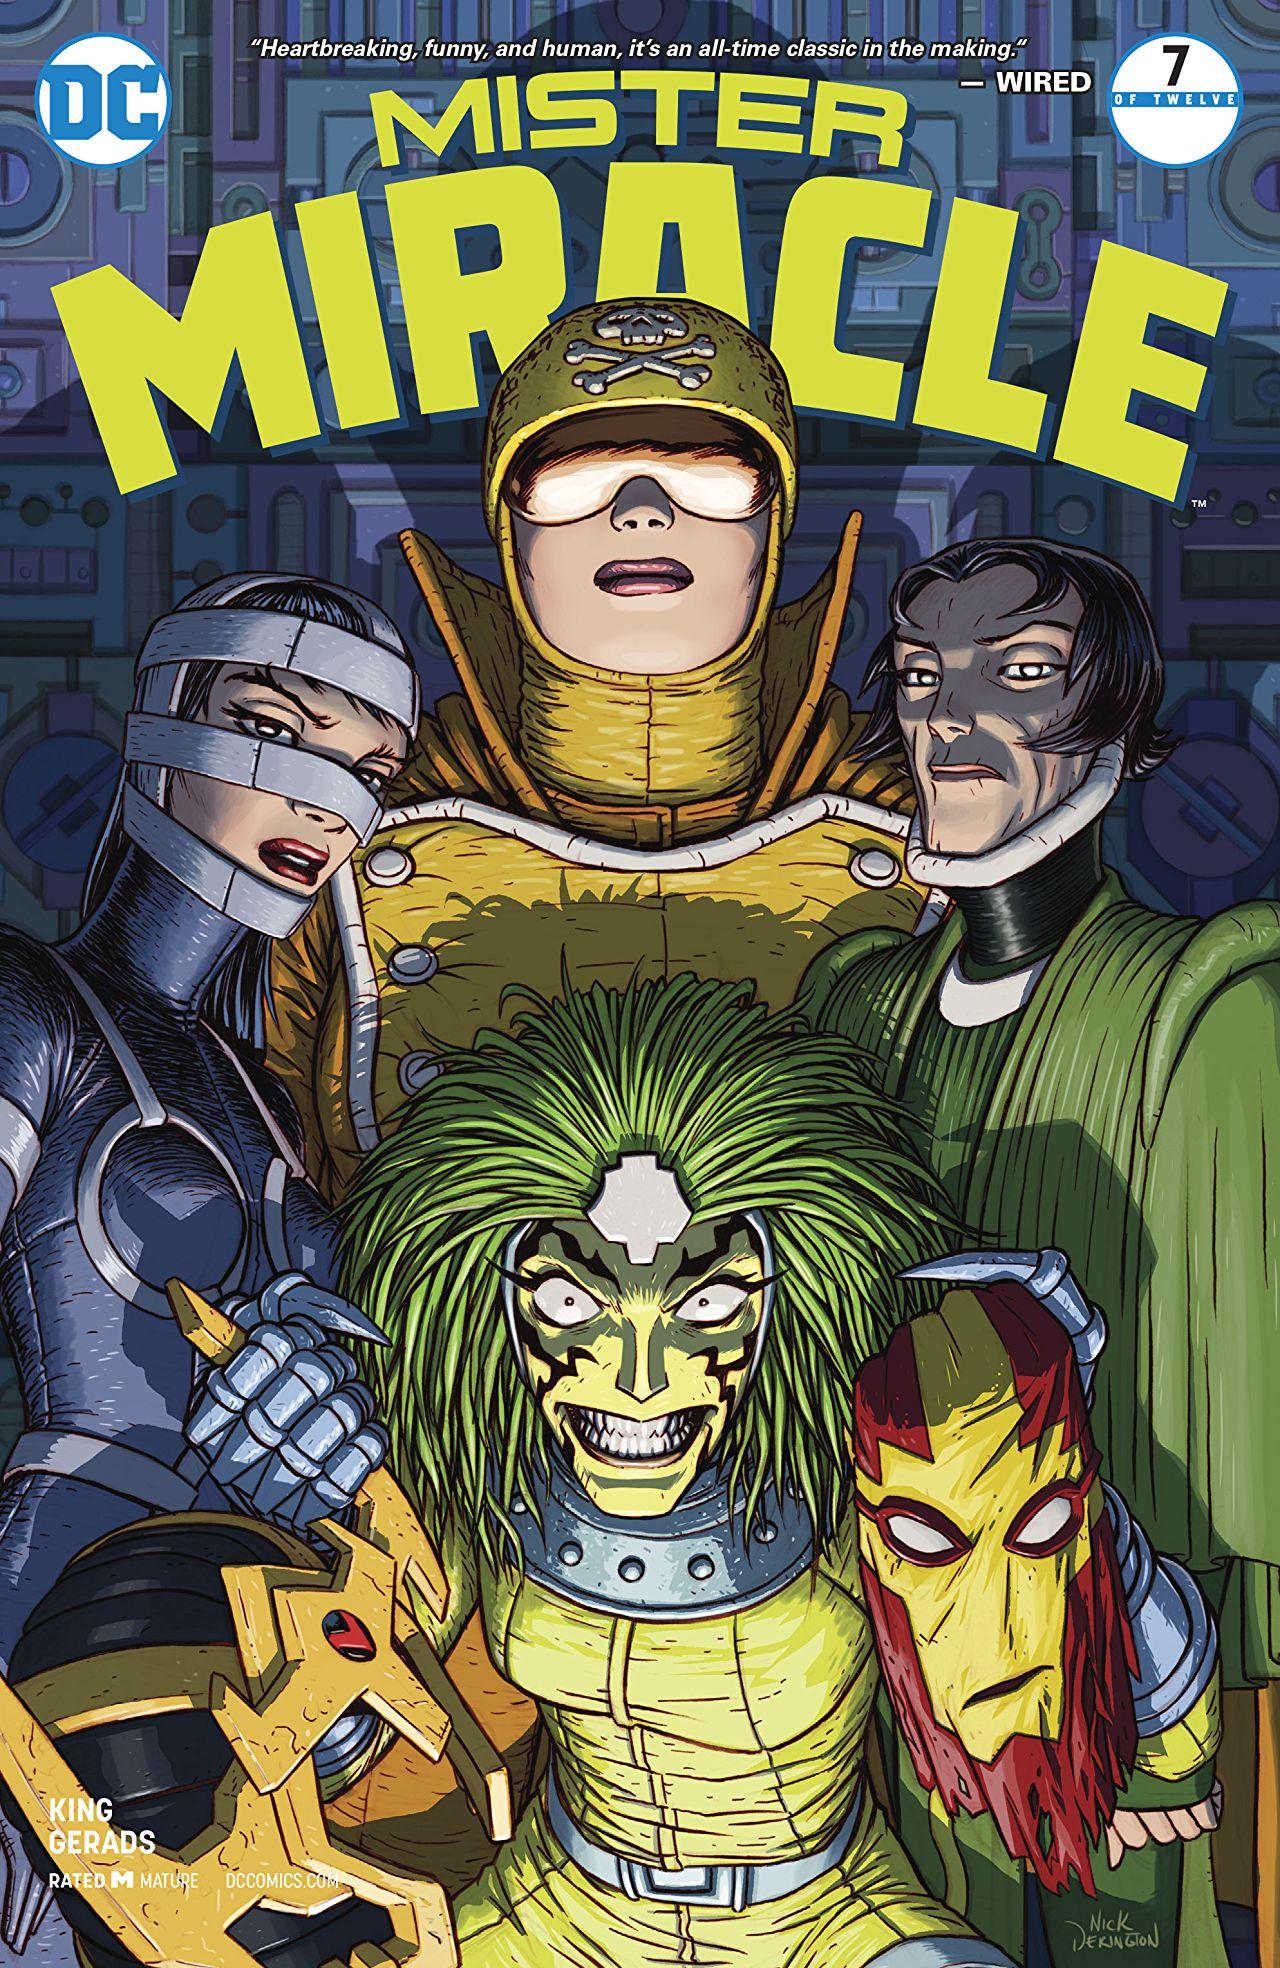 Mister Miracle Vol. 4 #7